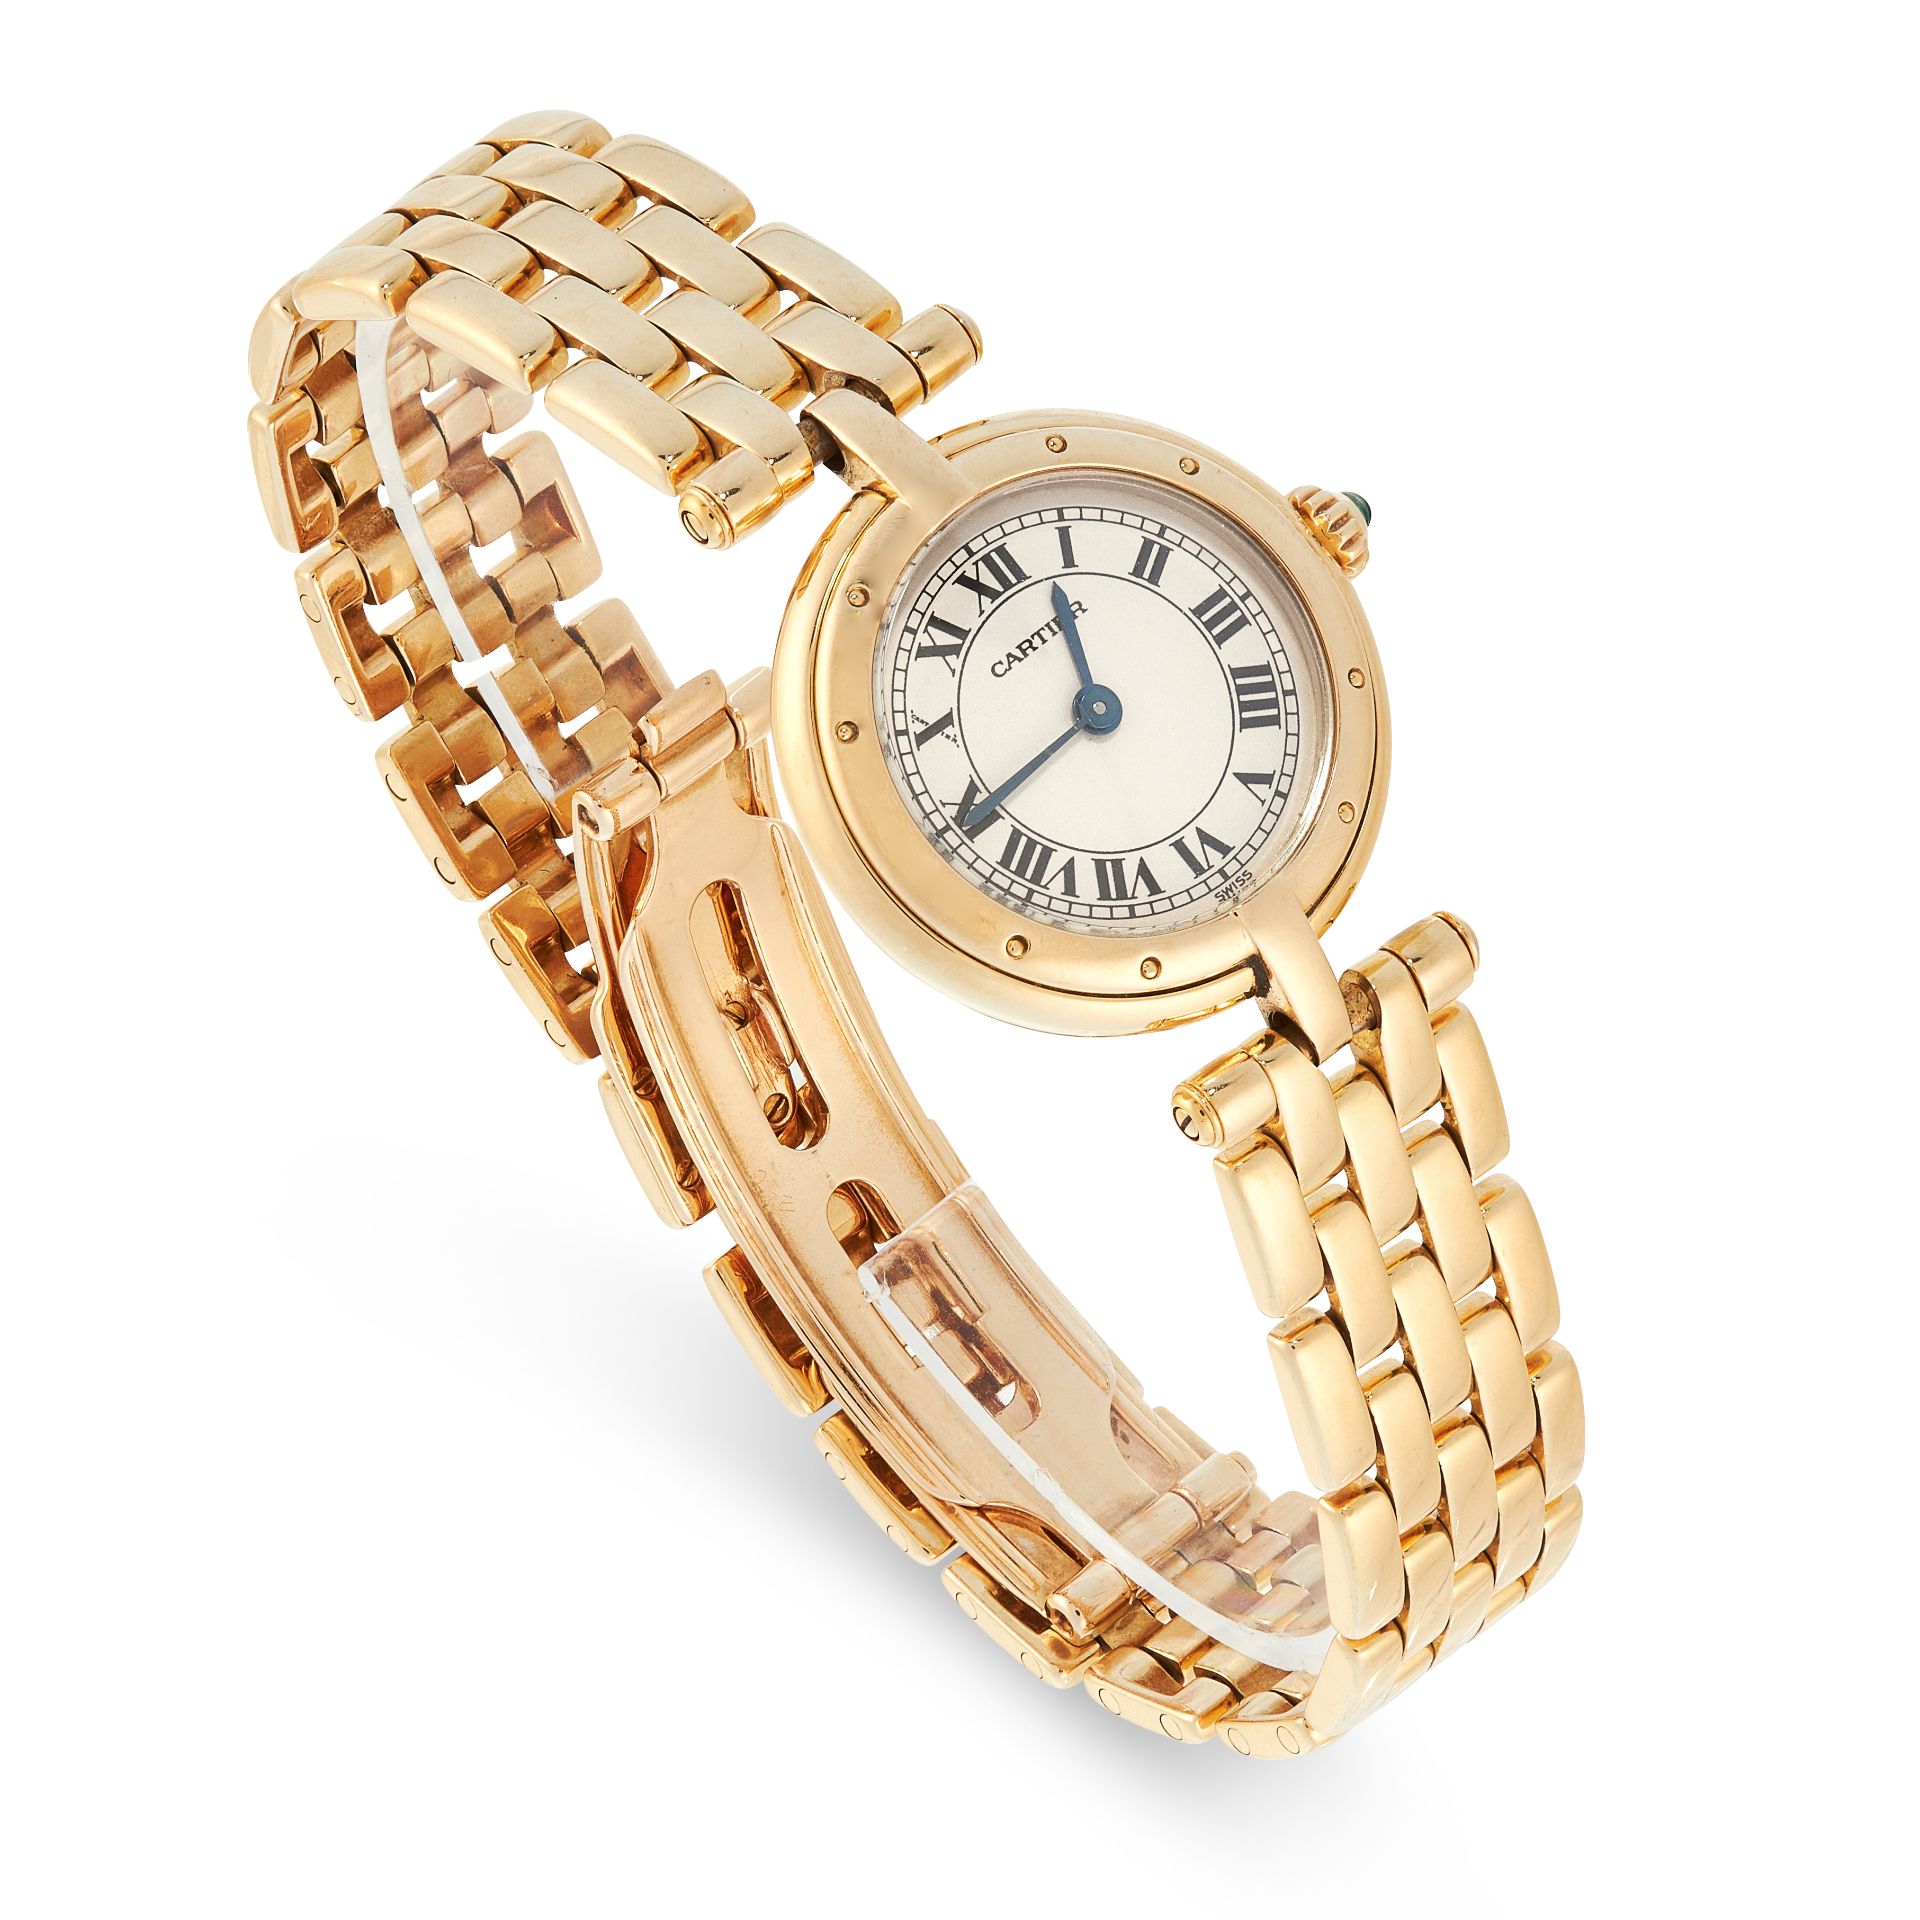 A LADIES PANTHERE RONDE WRISTWATCH, CARTIER in 18ct yellow gold, comprising of a round case set on